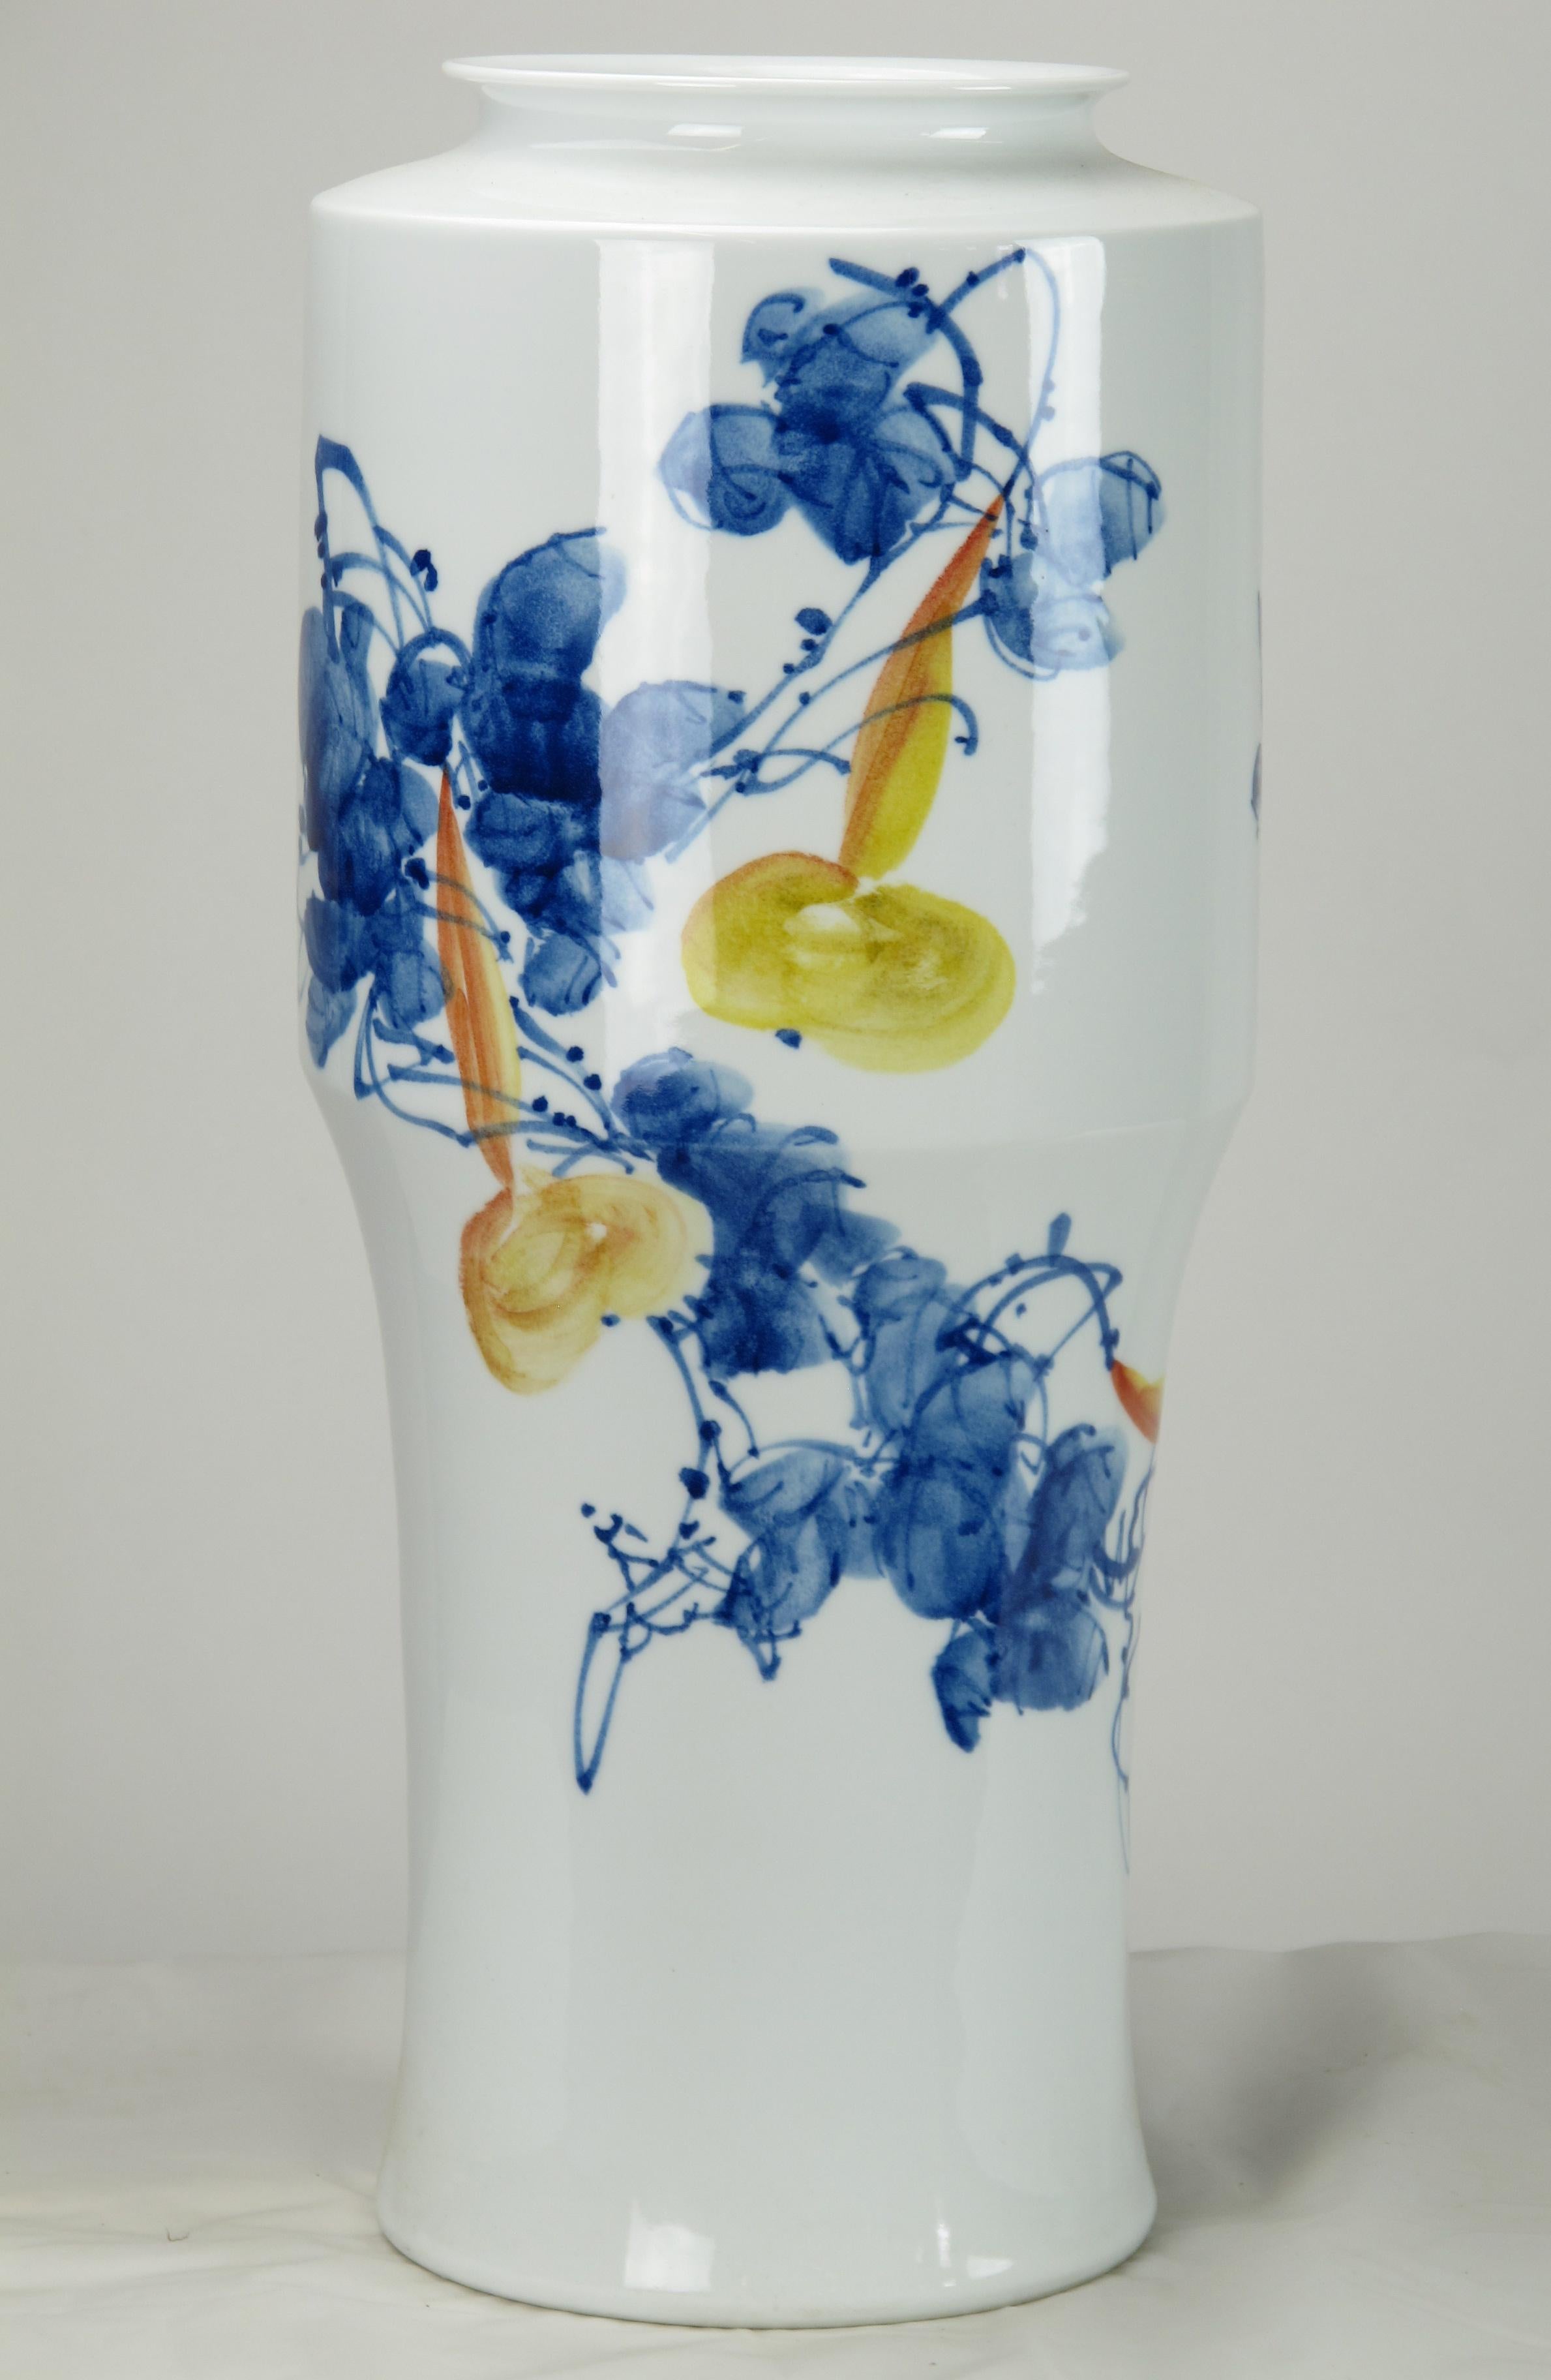 This modern blue & white porcelain vase was designed and made by Mr. Zhou, an artisan from Jingdezhen, an ancient city in the north east of Jiangxi province and well known for its porcelain industry. The shape and painting of each vase created by